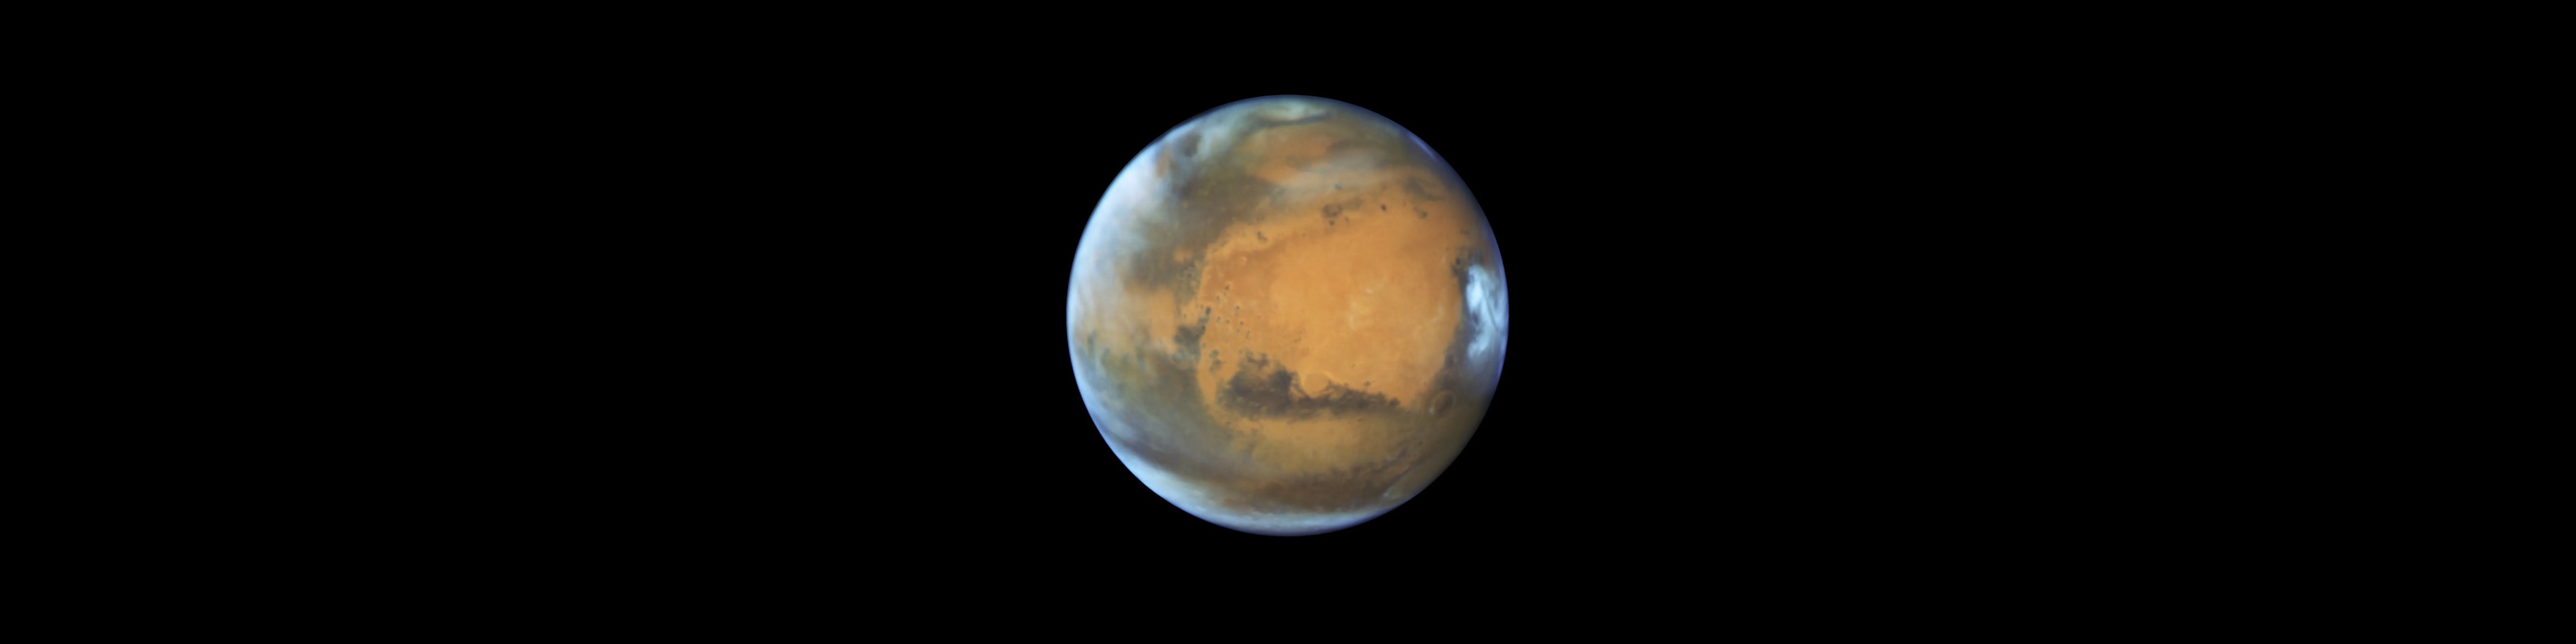 The planet Mars has an orange hue, splotched with dark brown areas of prominent features. A blue-white haze curves around the edges of the planet, particularly to the left in this image. A particularly bright spot of white clouds are visible to the right.